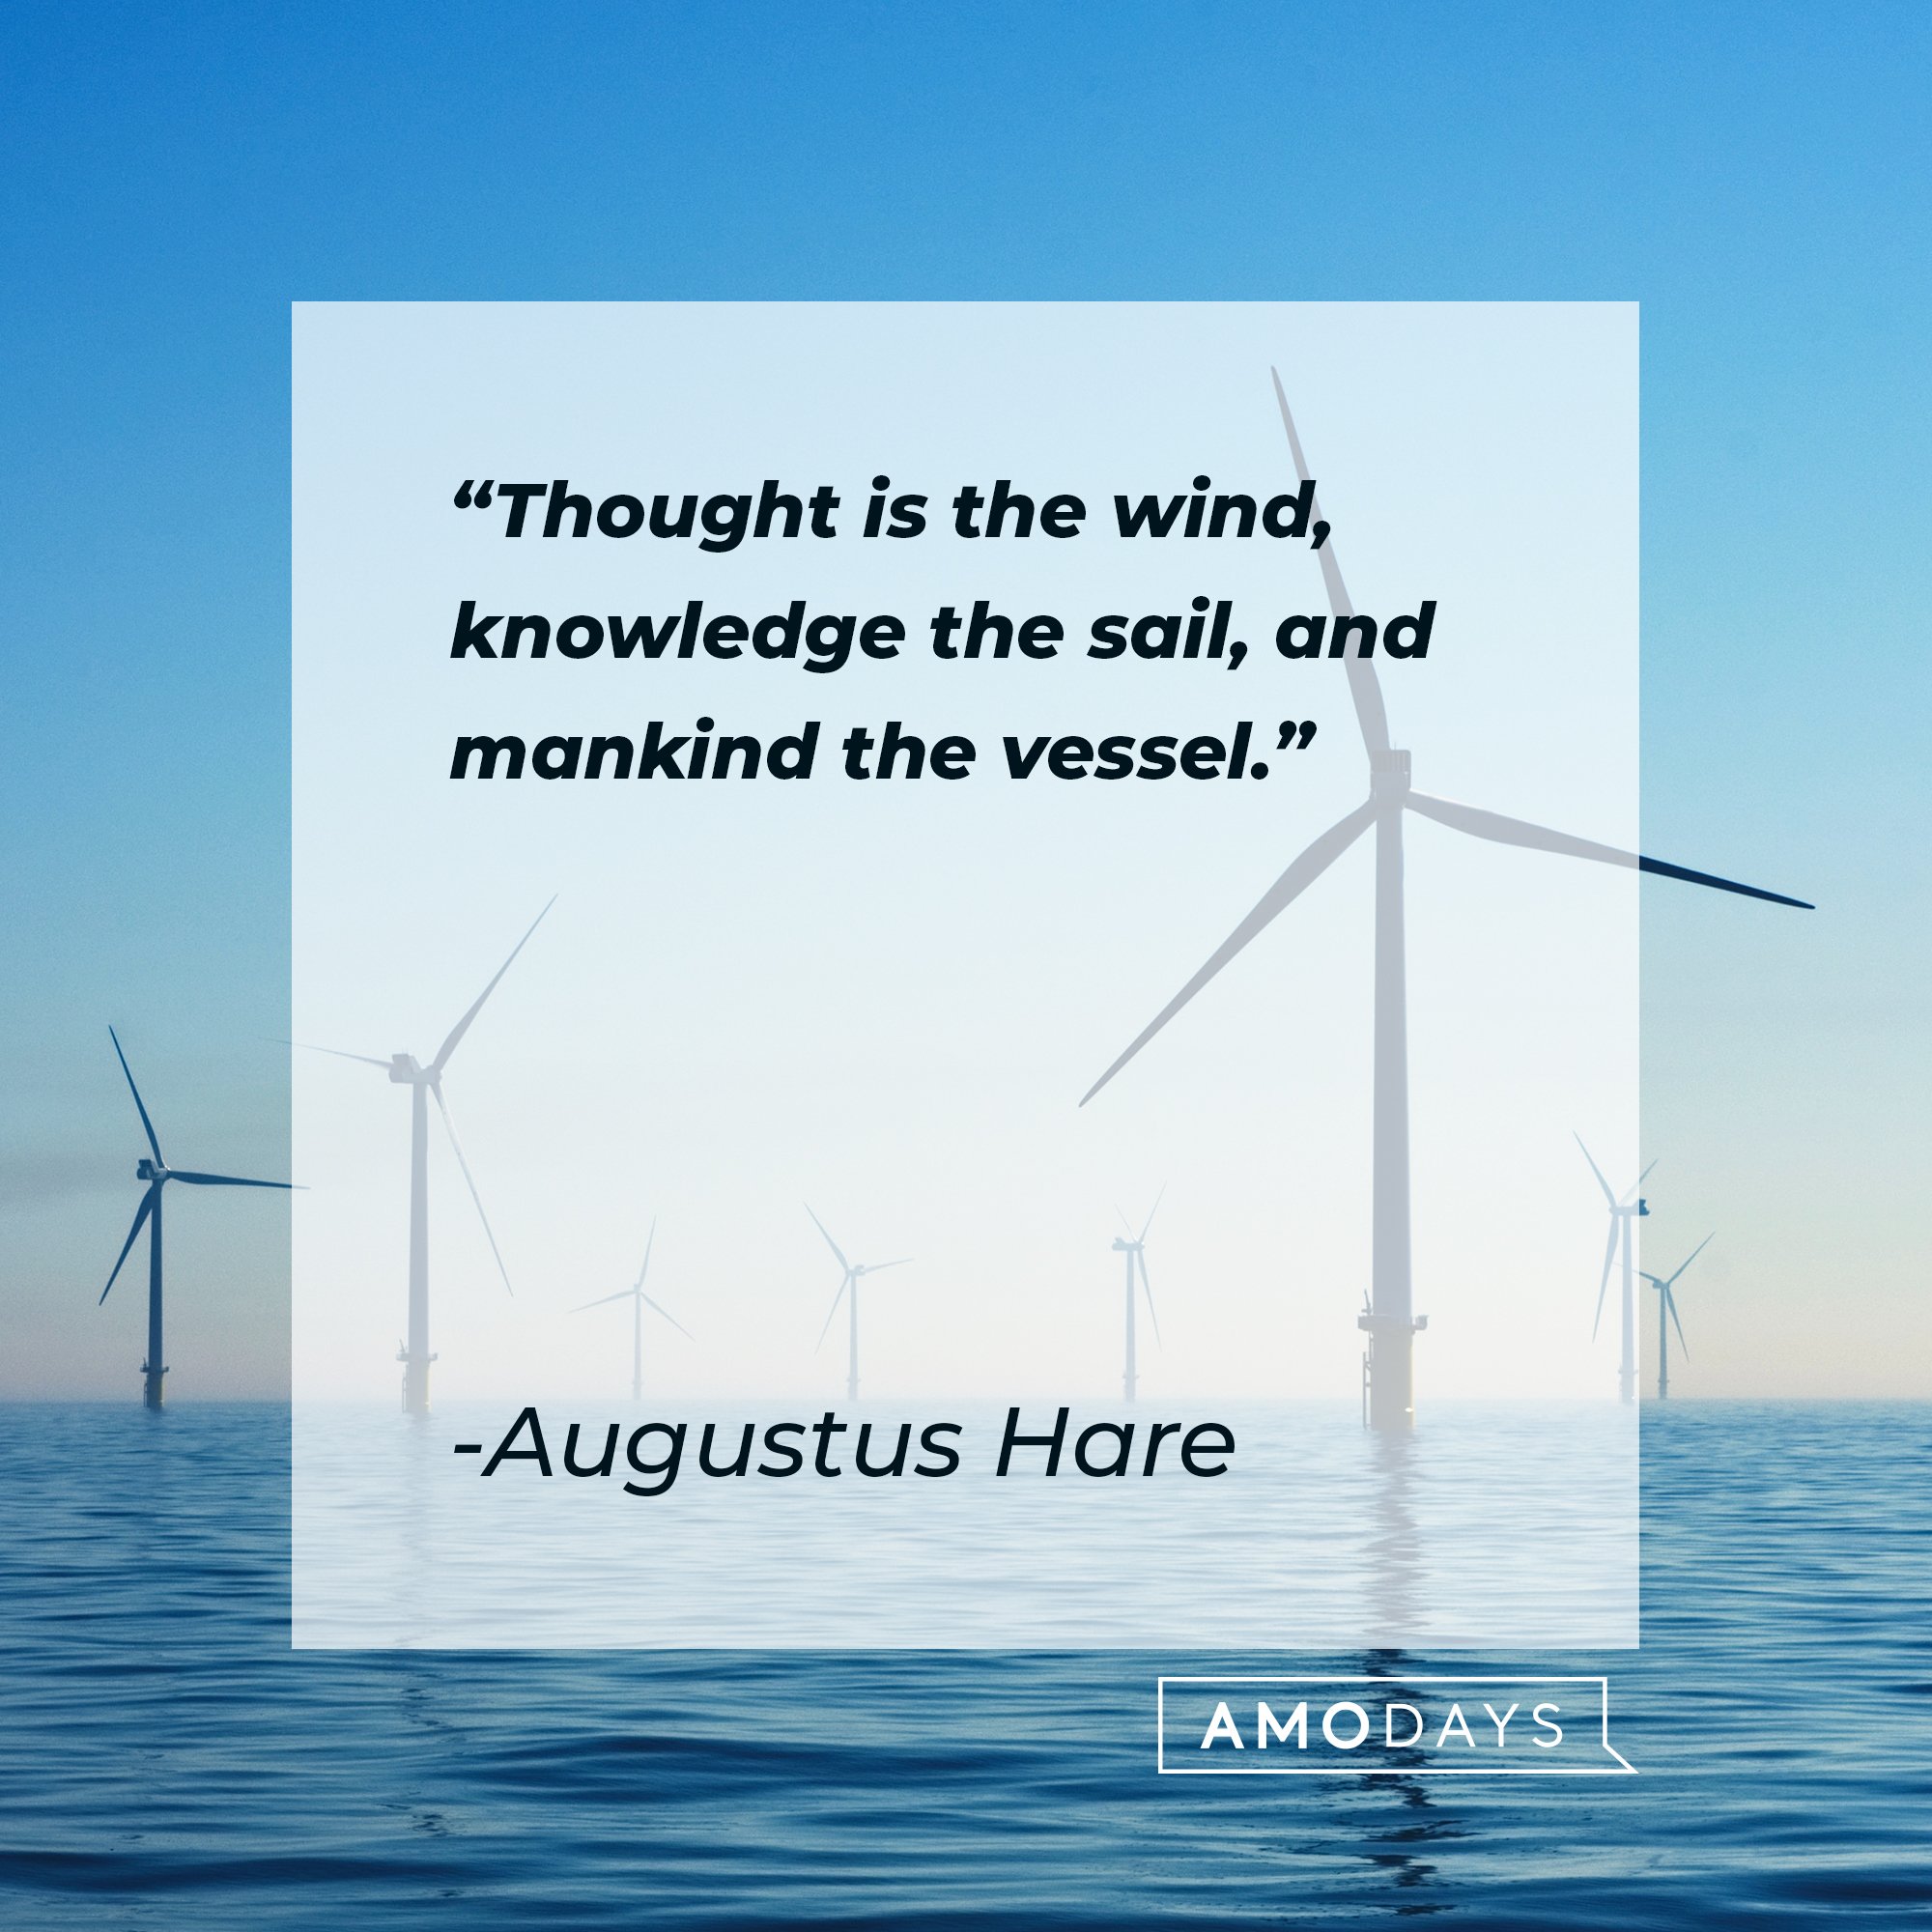 Augustus Hare's quote: "Thought is the wind, knowledge the sail, and mankind the vessel." | Image: AmoDays